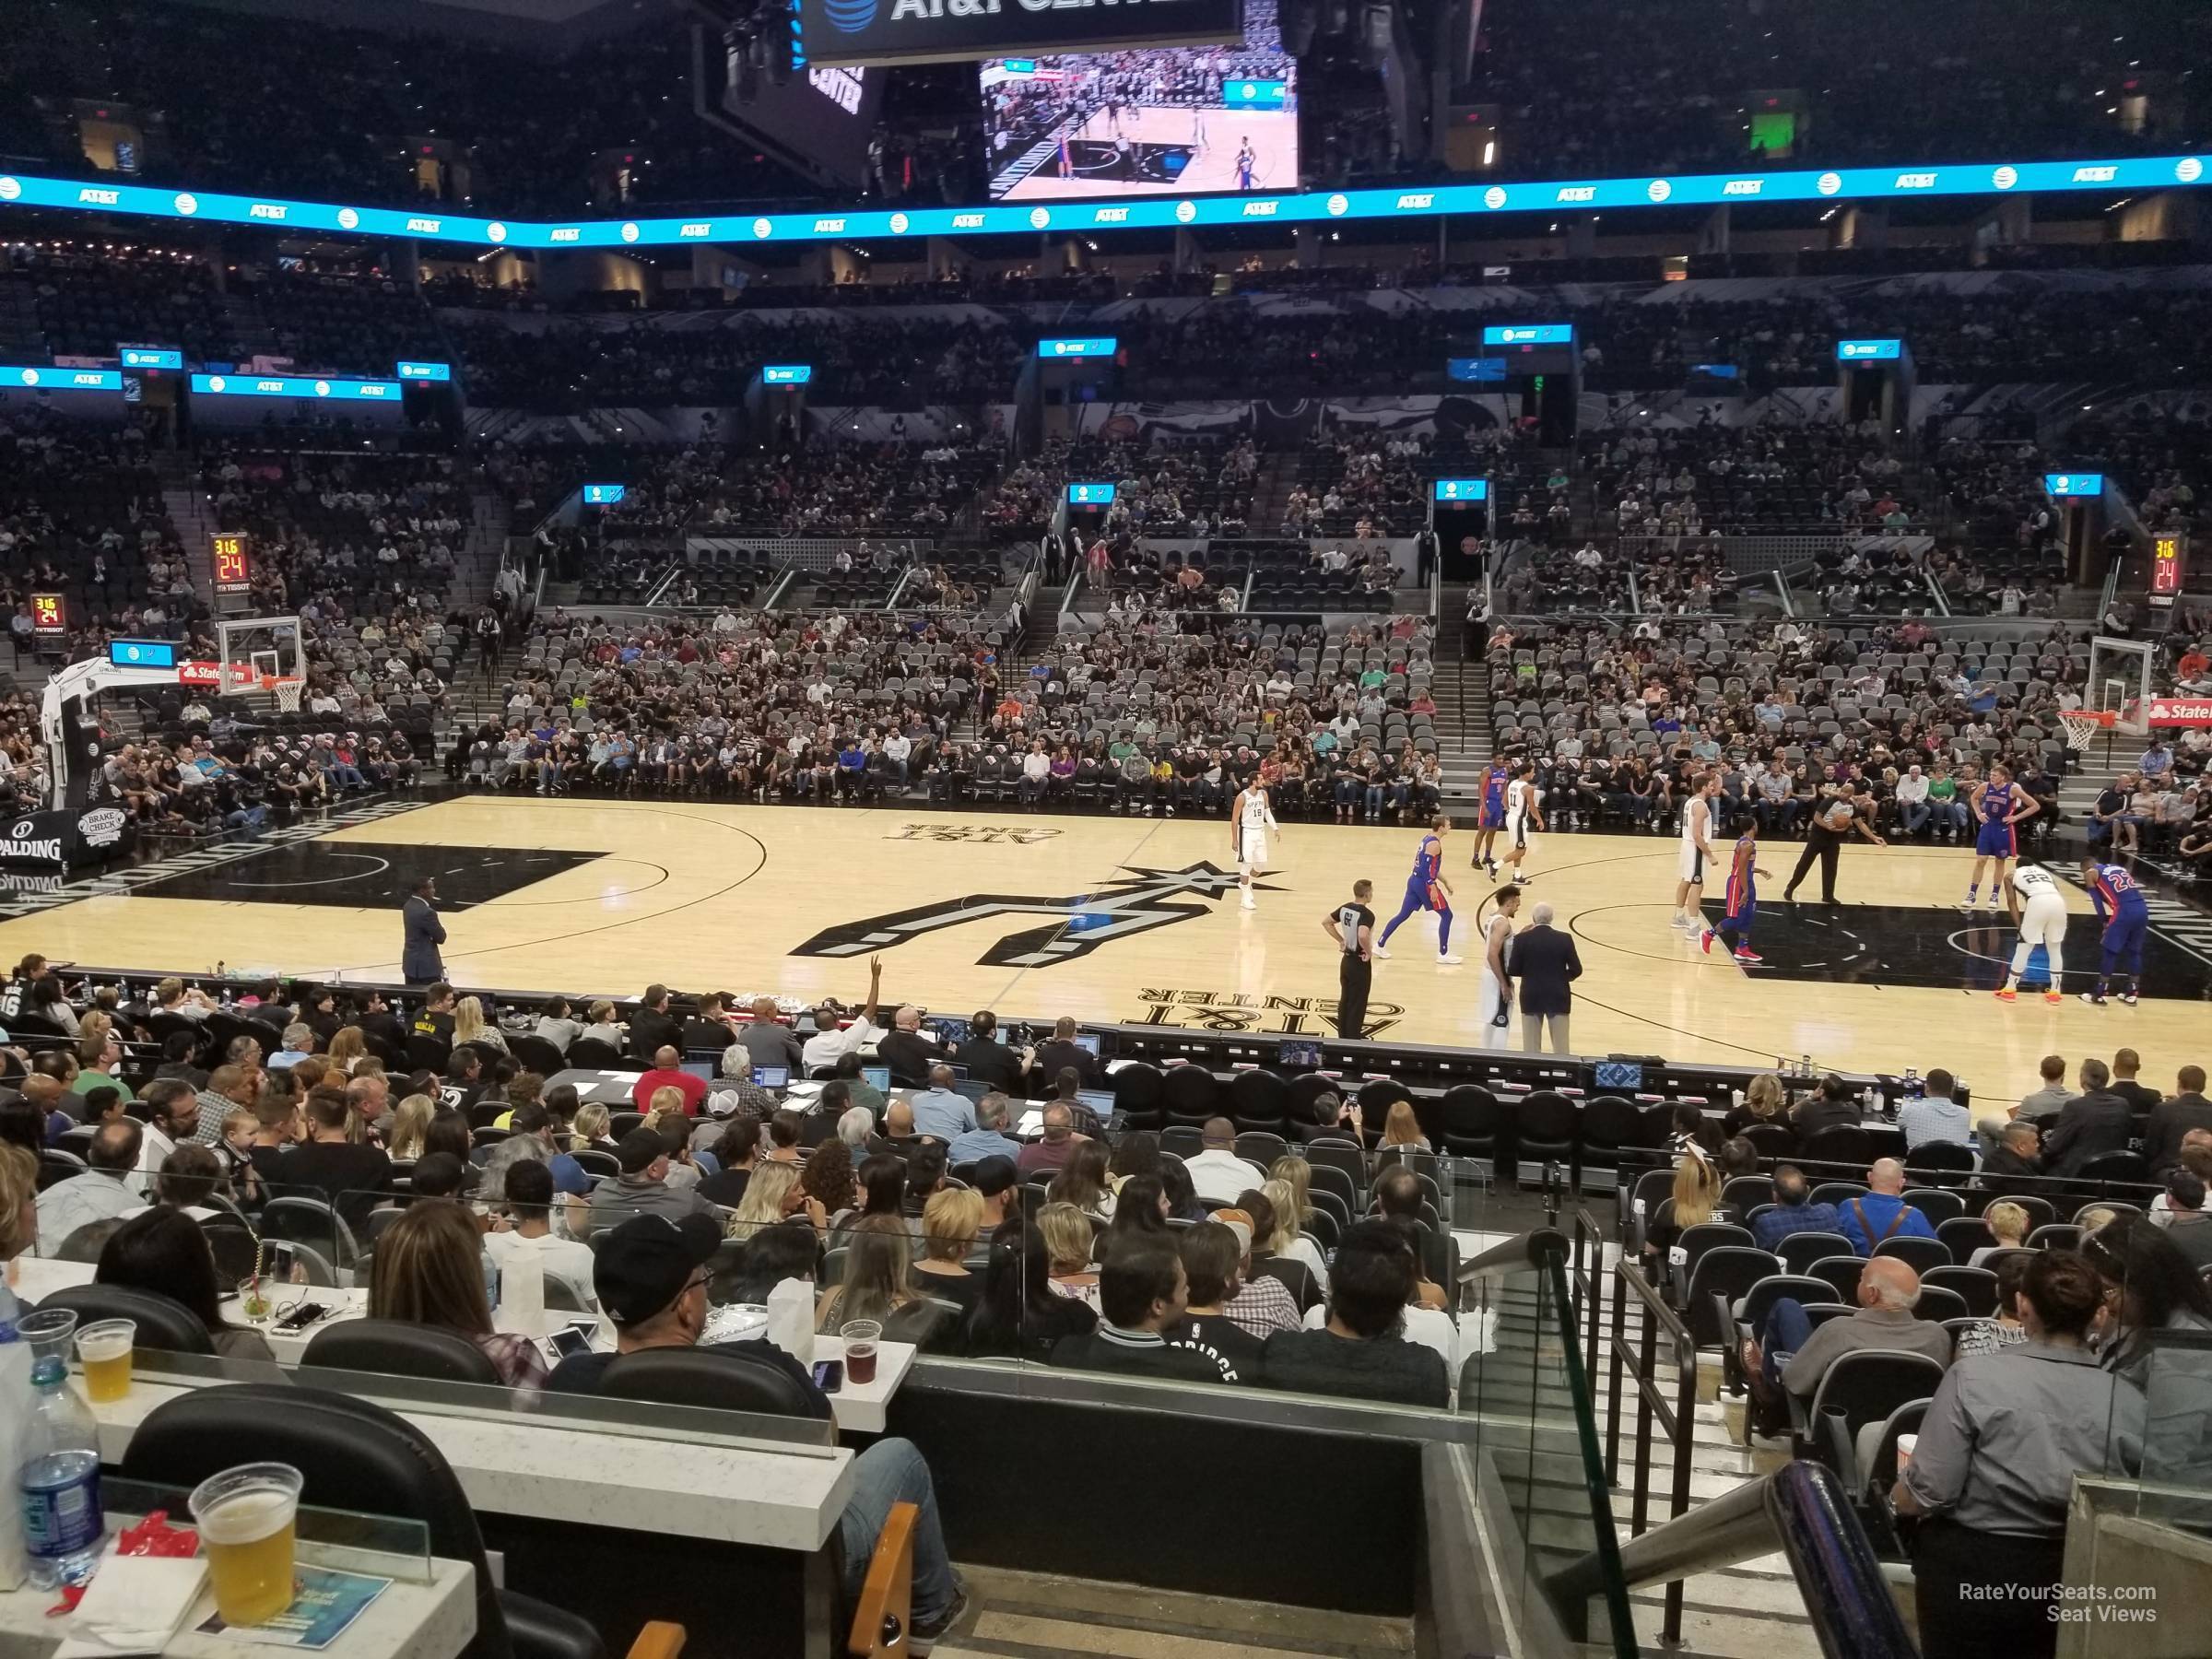 section 8, row 13 seat view  for basketball - at&t center